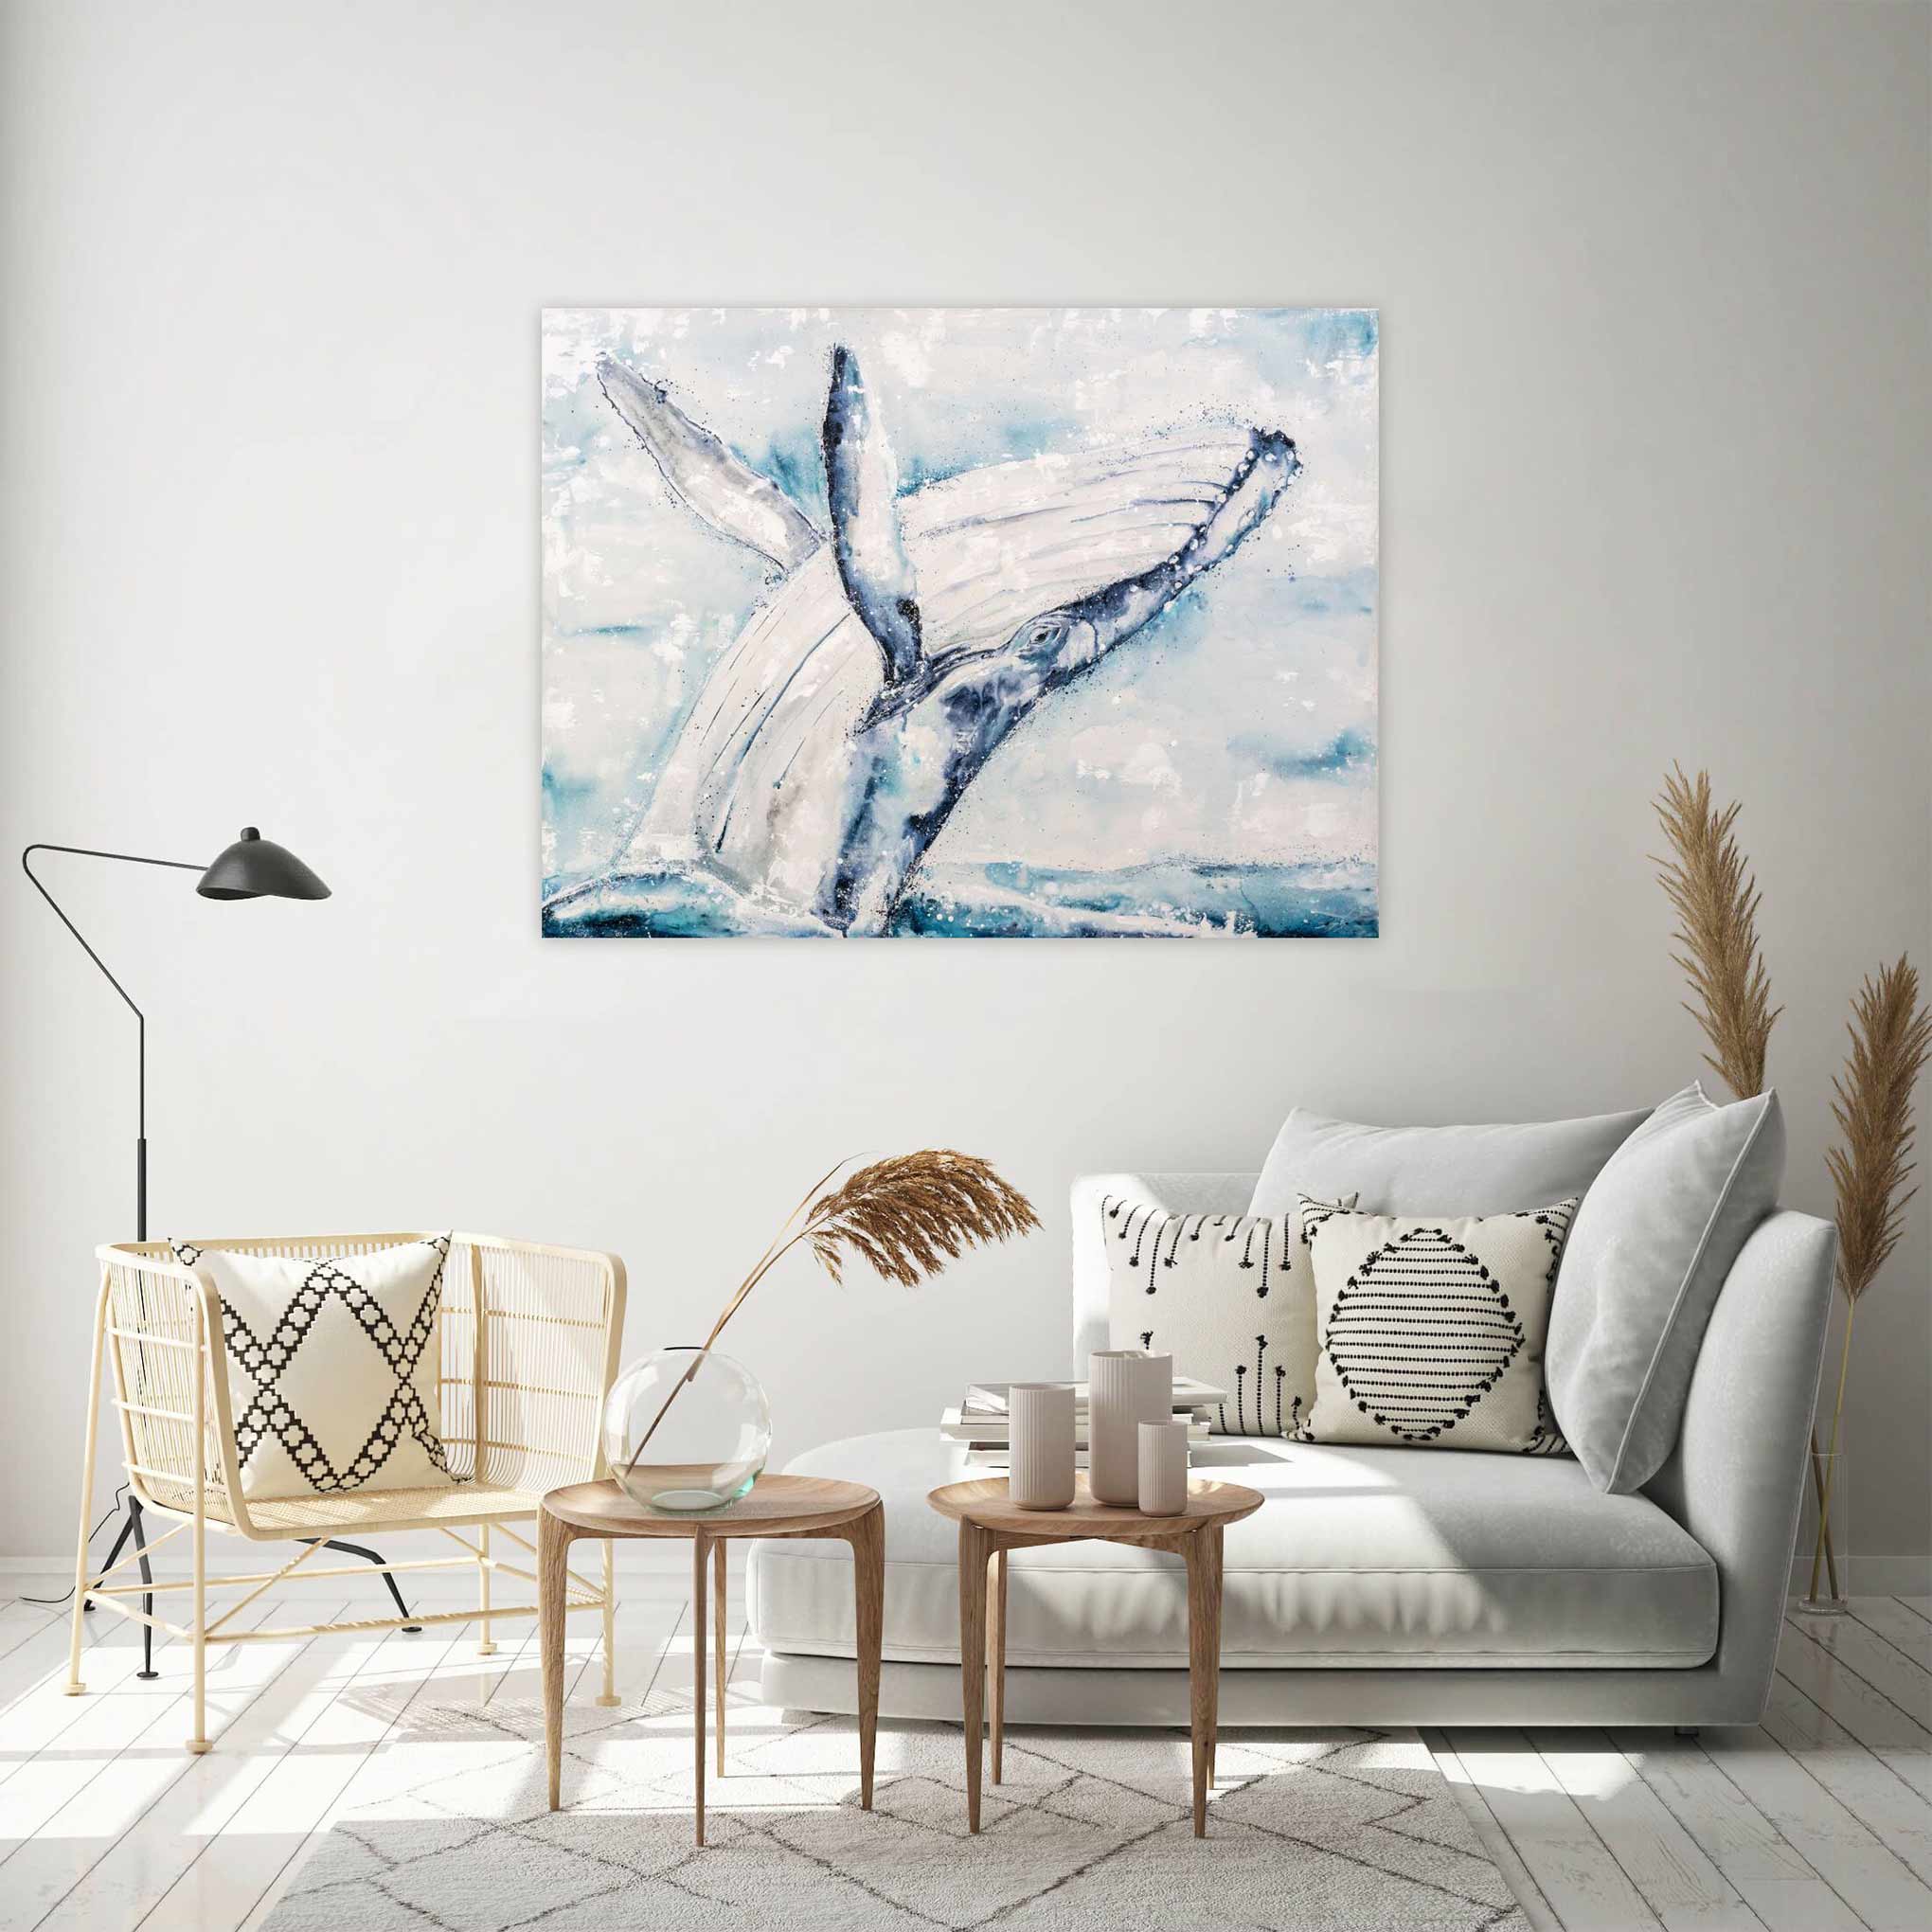 Whale canvas print on wall in home